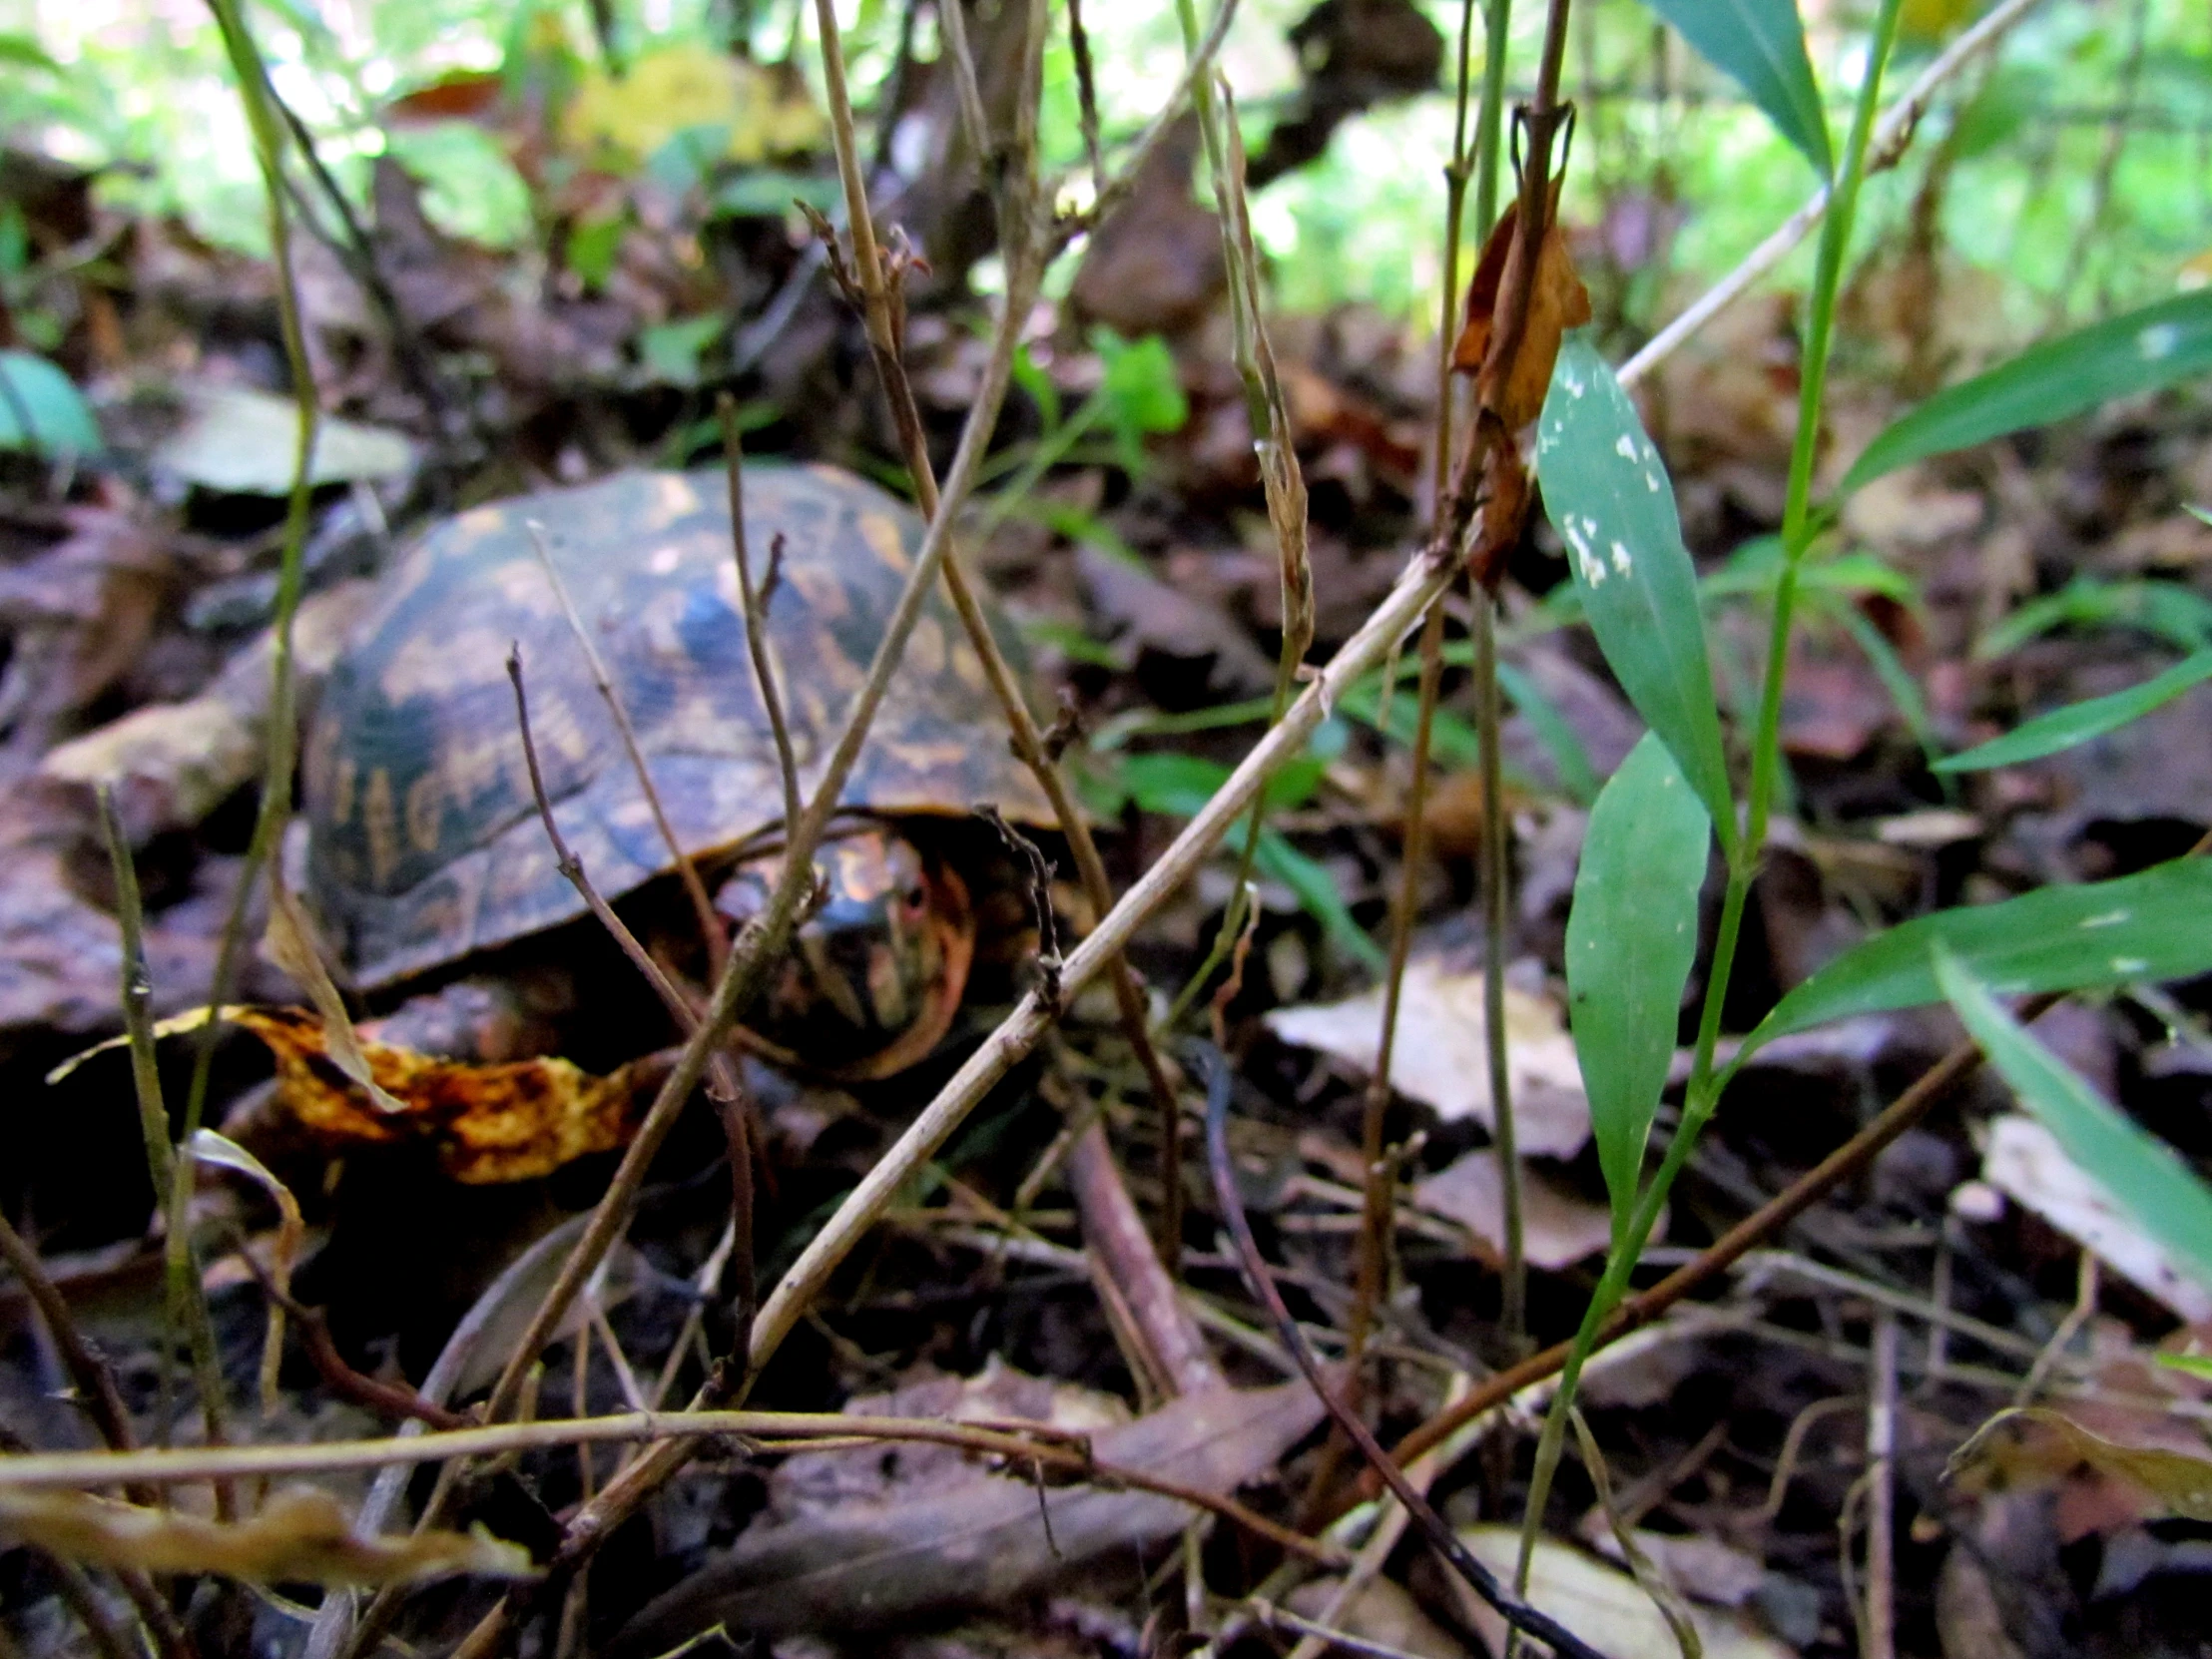 a turtle sitting in a clearing on the ground